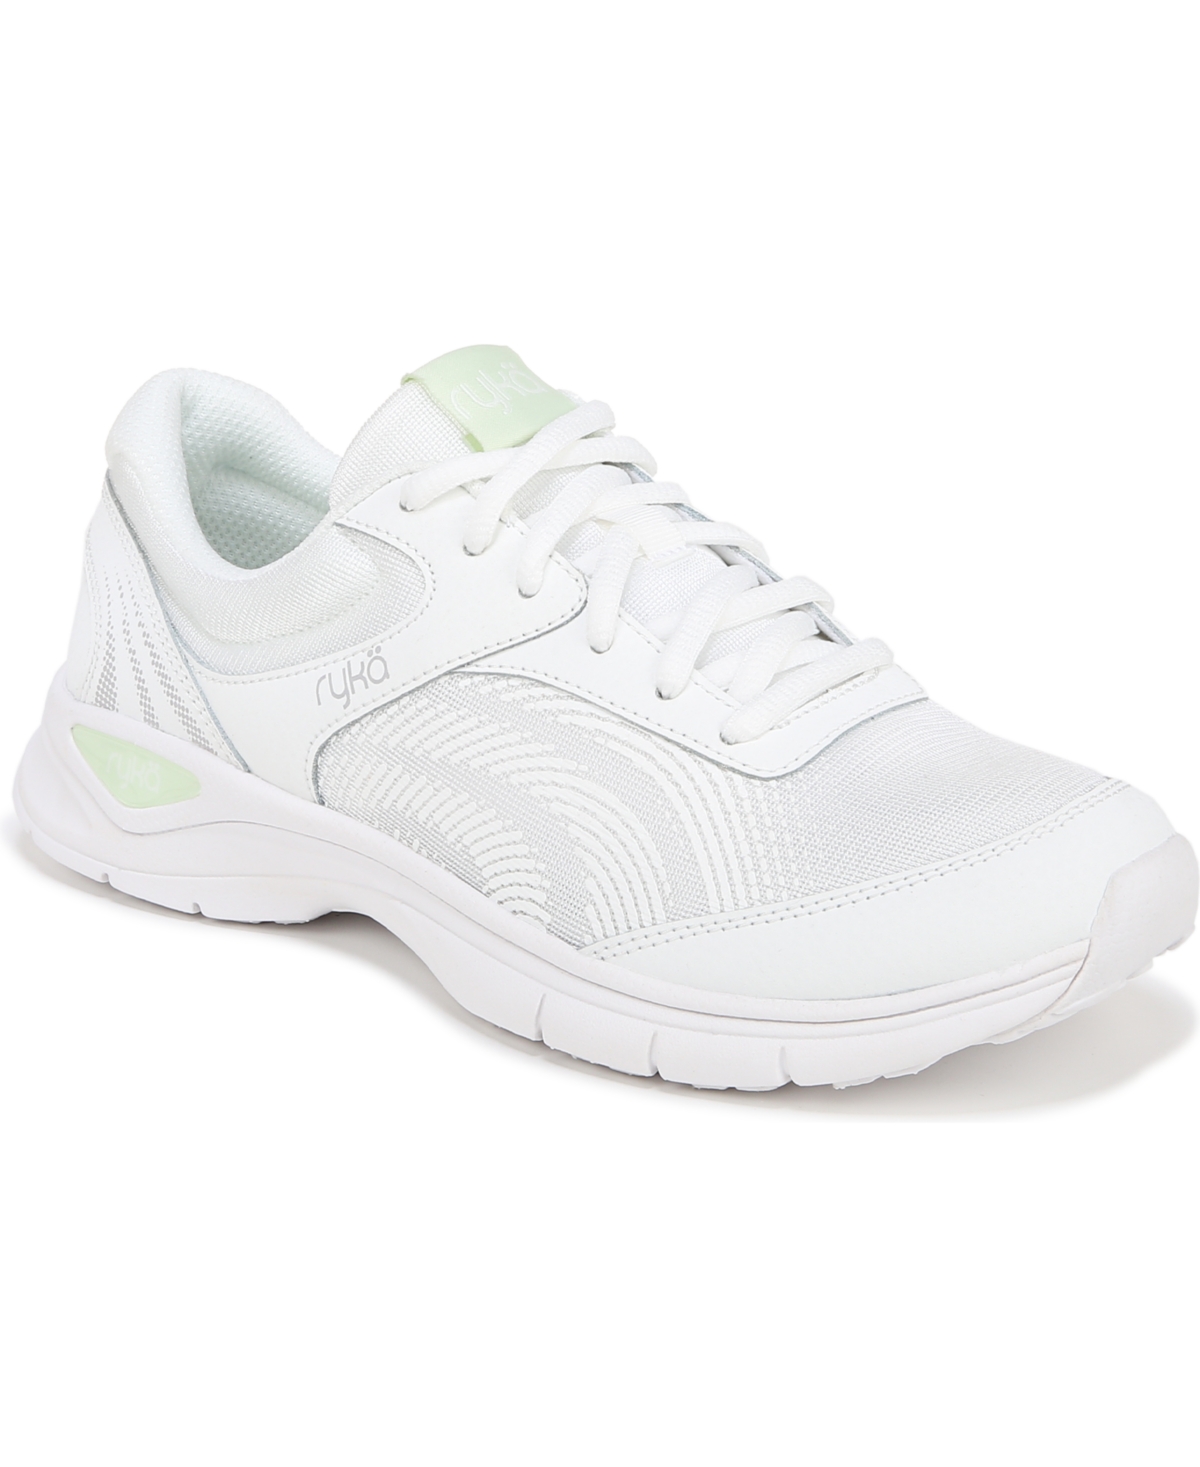 Women's Relay Training Sneakers - Brilliant White Mesh/Leather